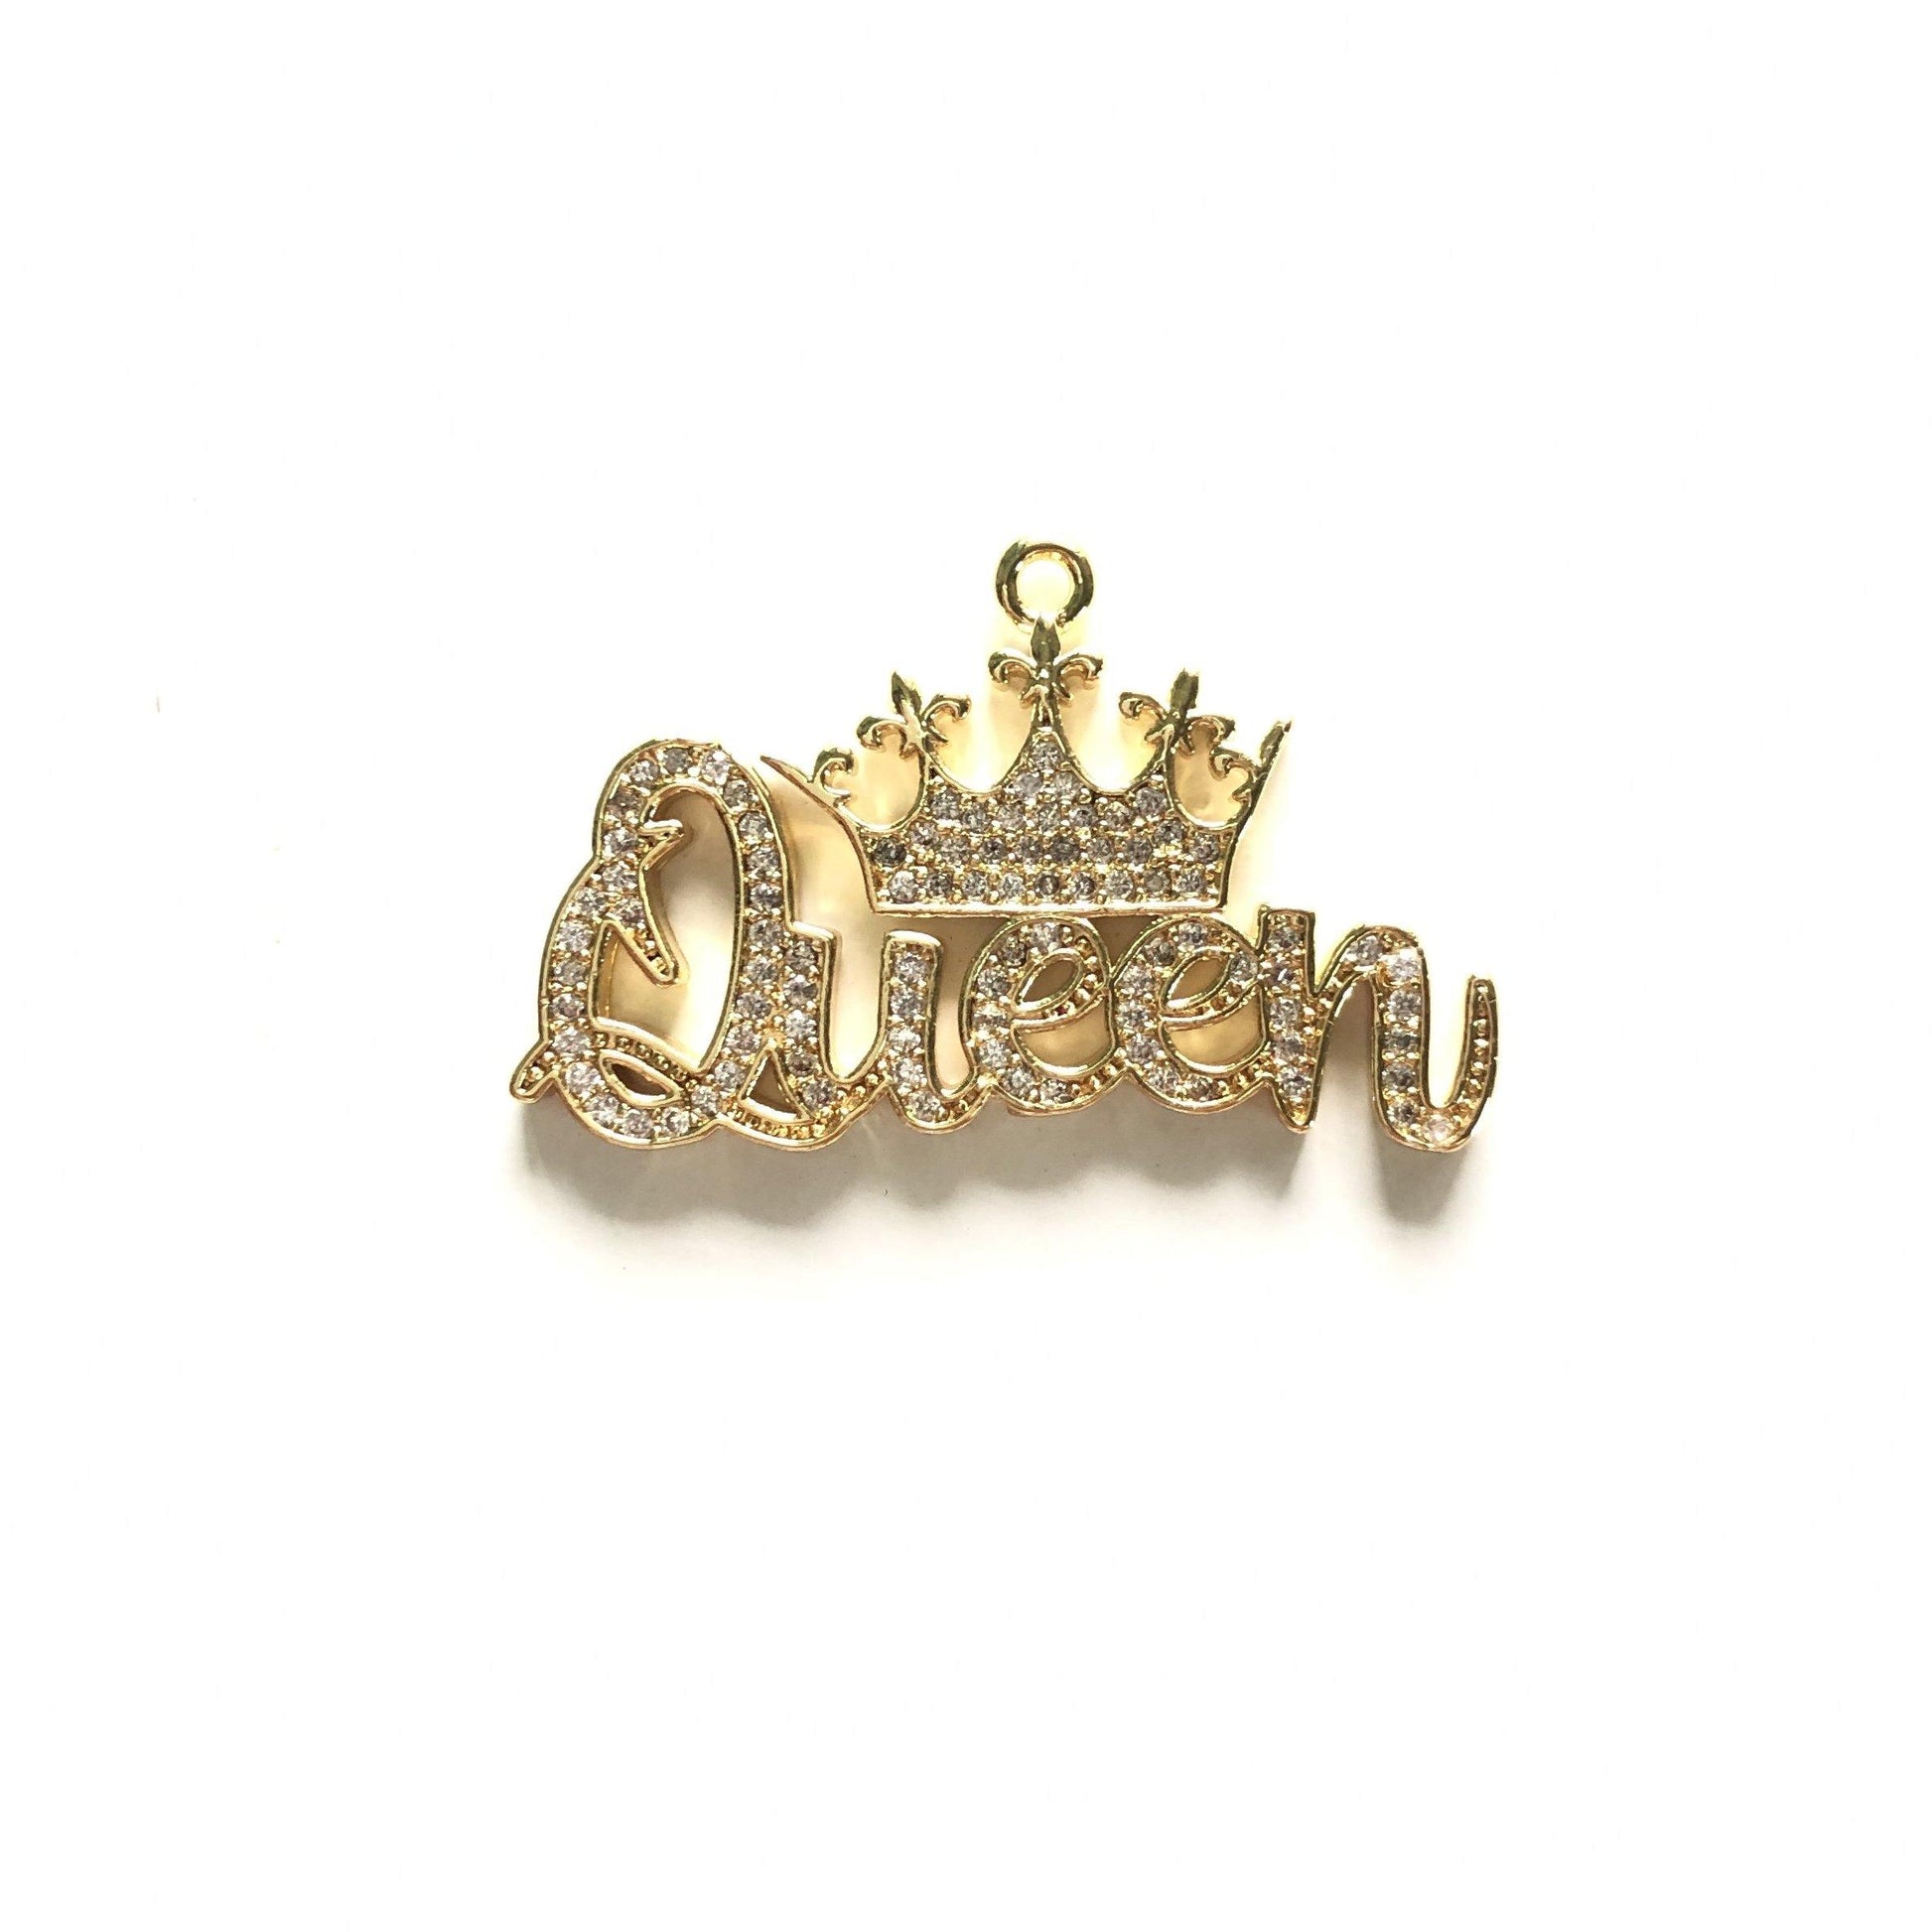 10pcs/lot 33.5*21mm CZ Paved Crown Queen Charms Gold CZ Paved Charms Crowns Queen Charms Words & Quotes Charms Beads Beyond